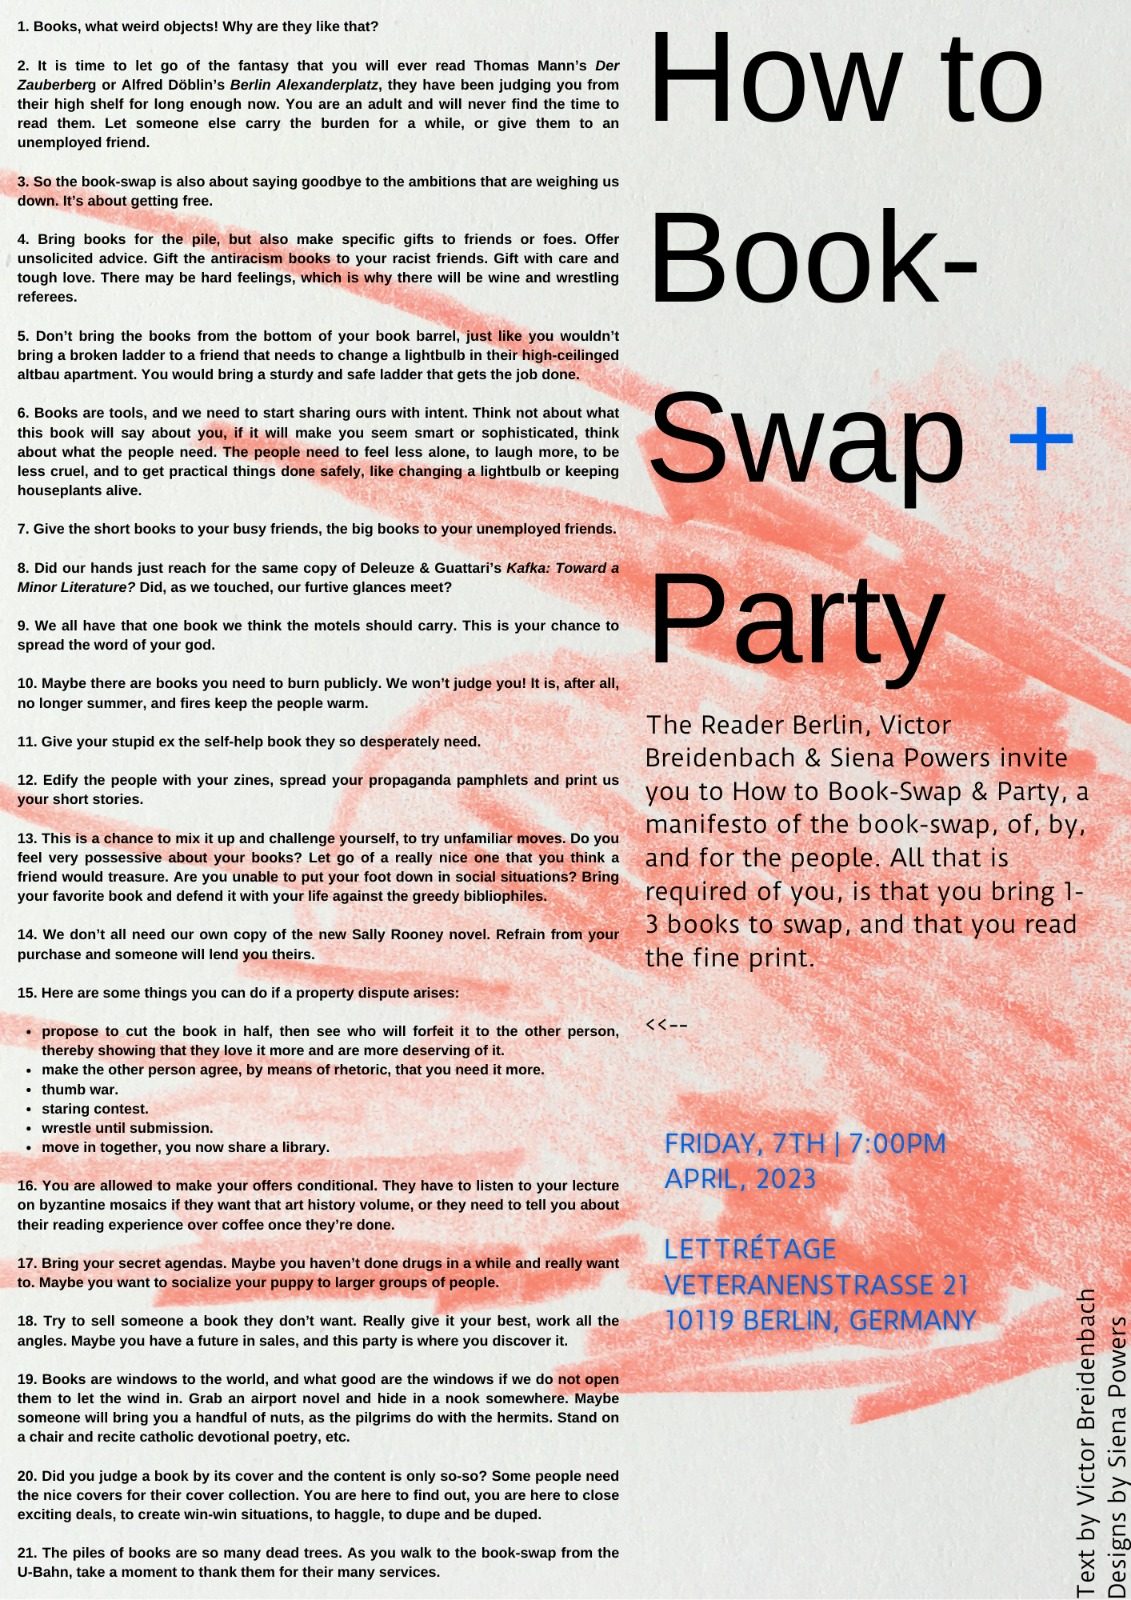 Poster with instructions on how to book swap with friends